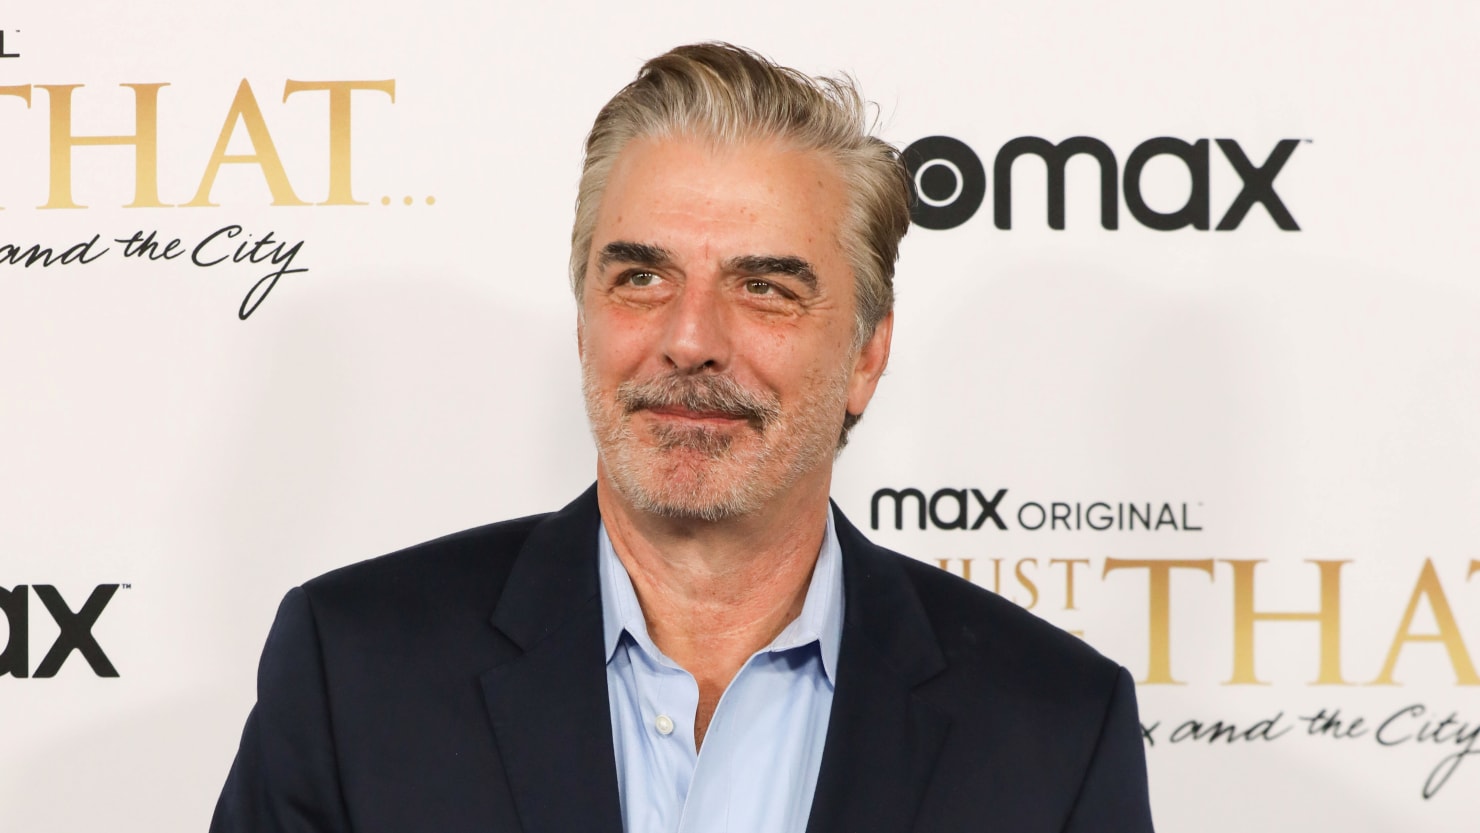 Former And Just Like That… Star Chris Noth Denies Sexual Assault Allegations in New Interview